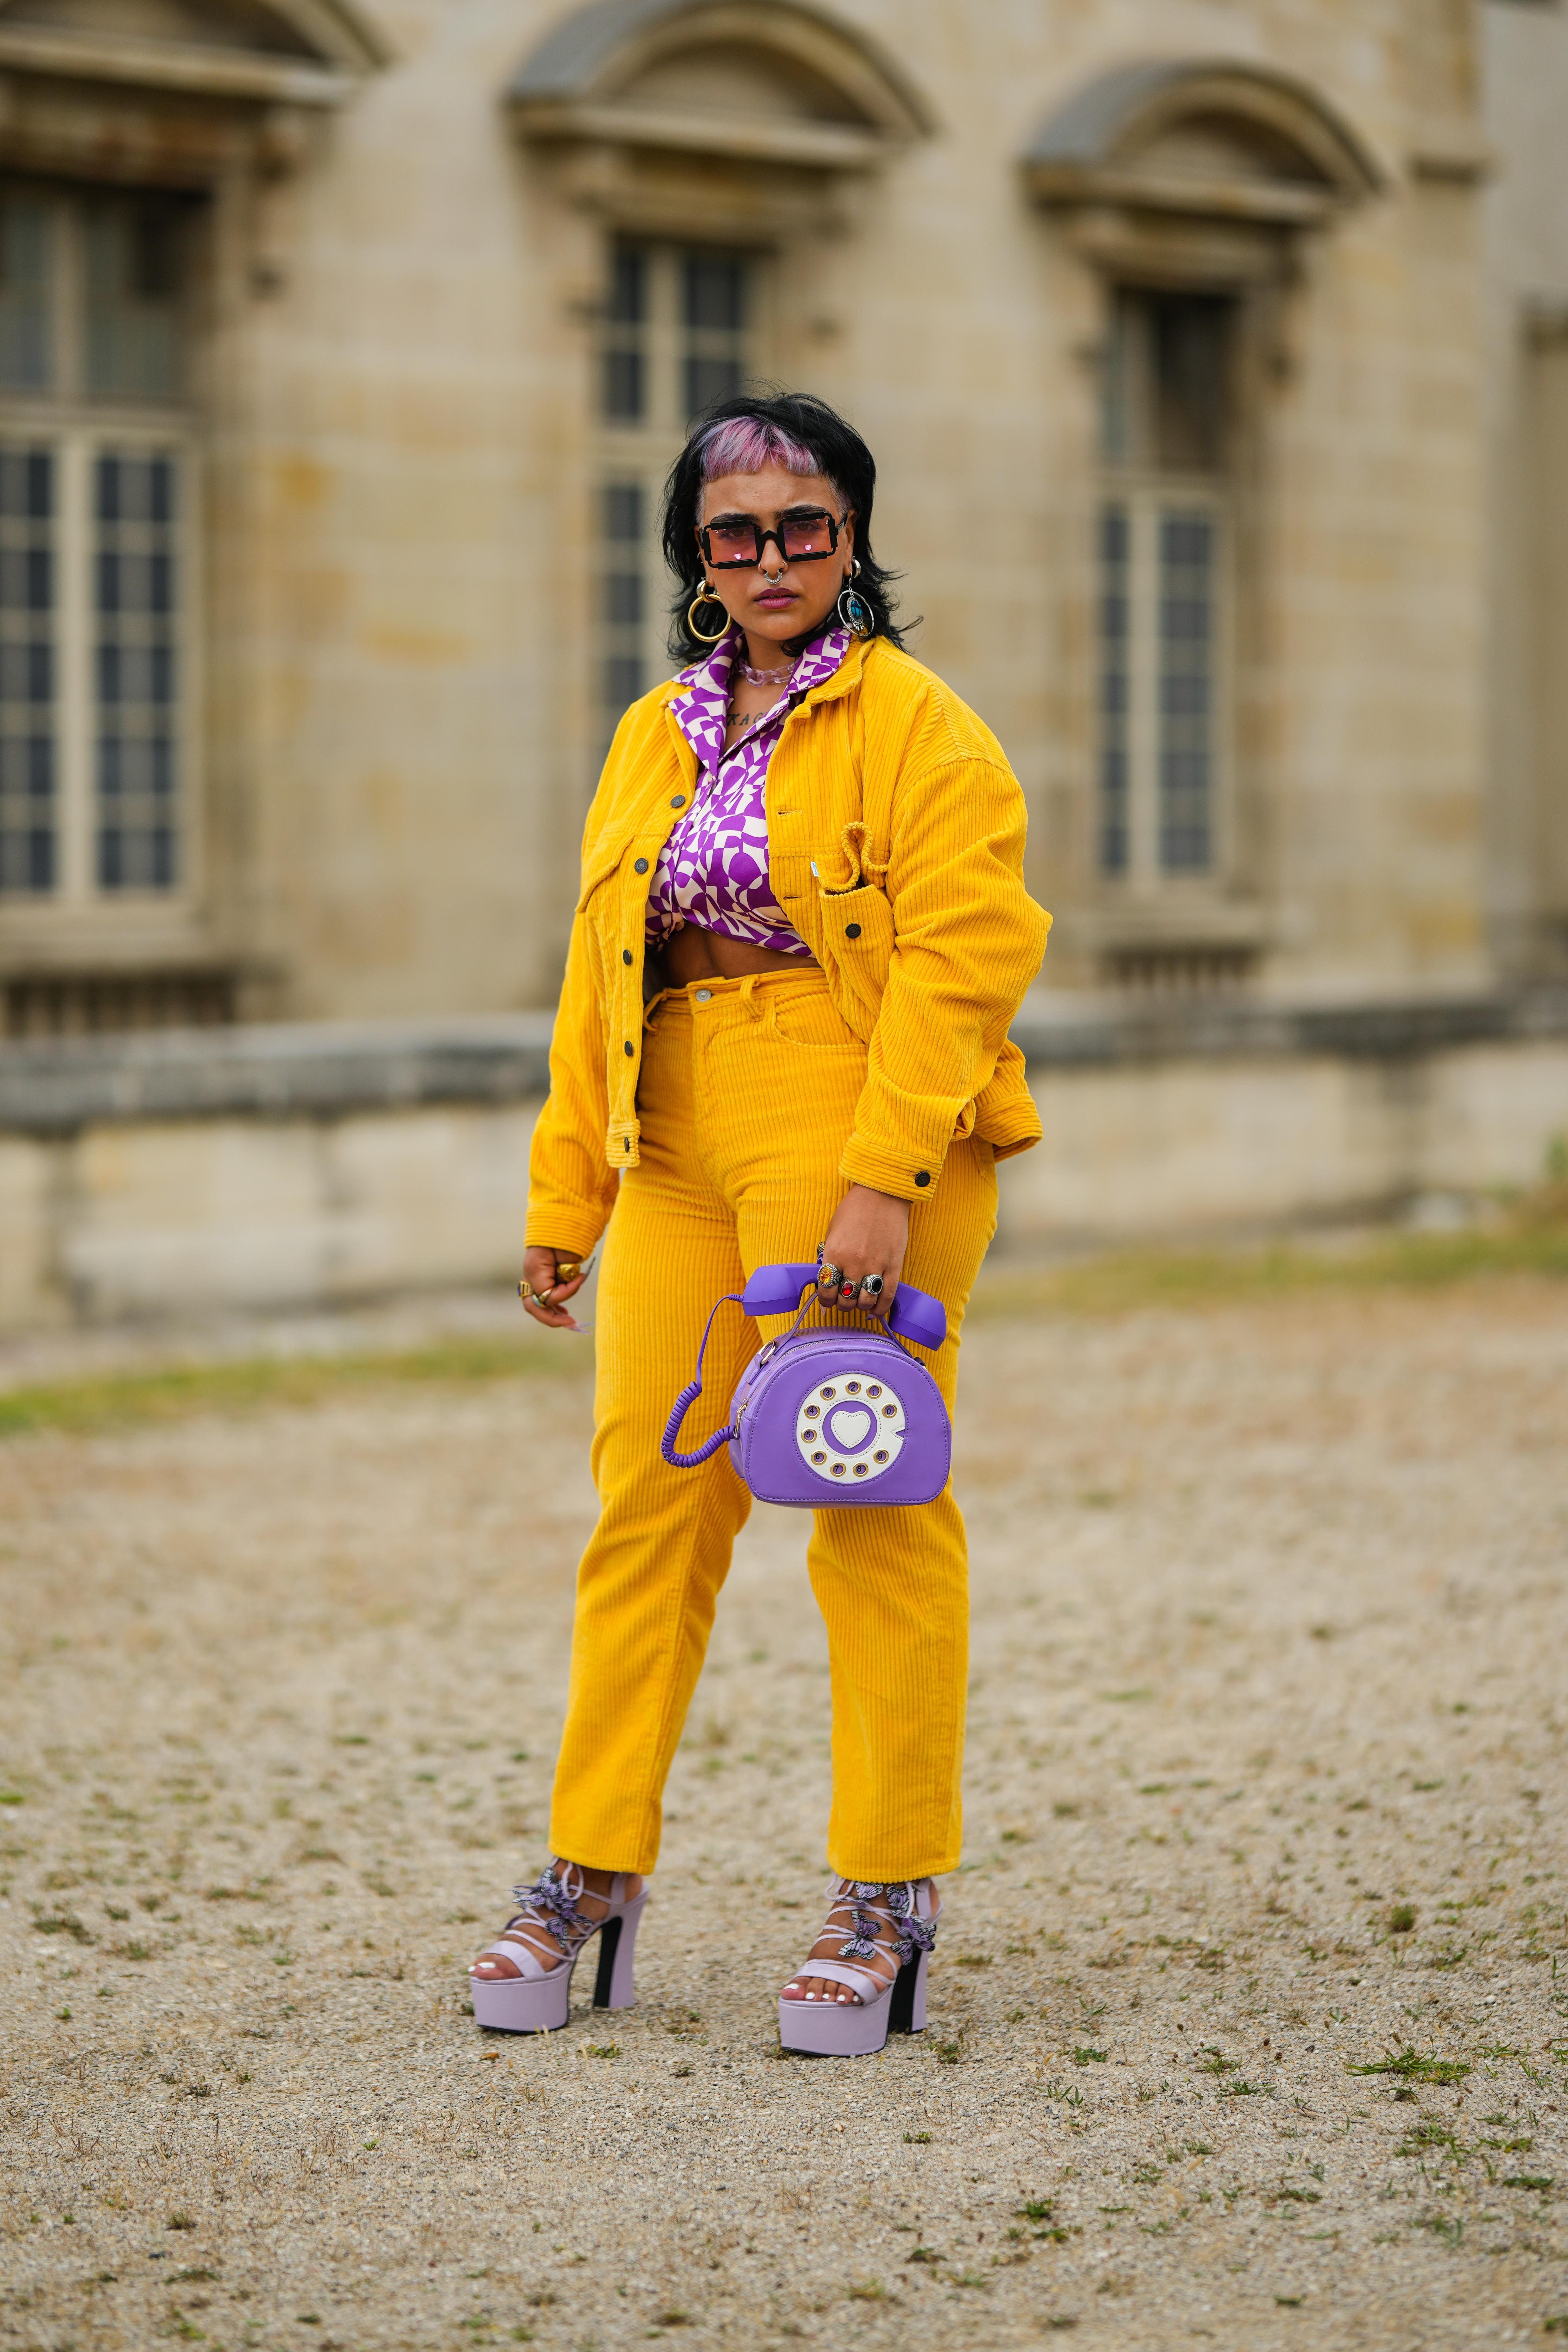 A woman photographed wearing matching corduroy pants and jacket during Paris Fashion Week - Menswear Spring/Summer 2023, on June 22, 2022, in Paris, France. | Source: Getty Images